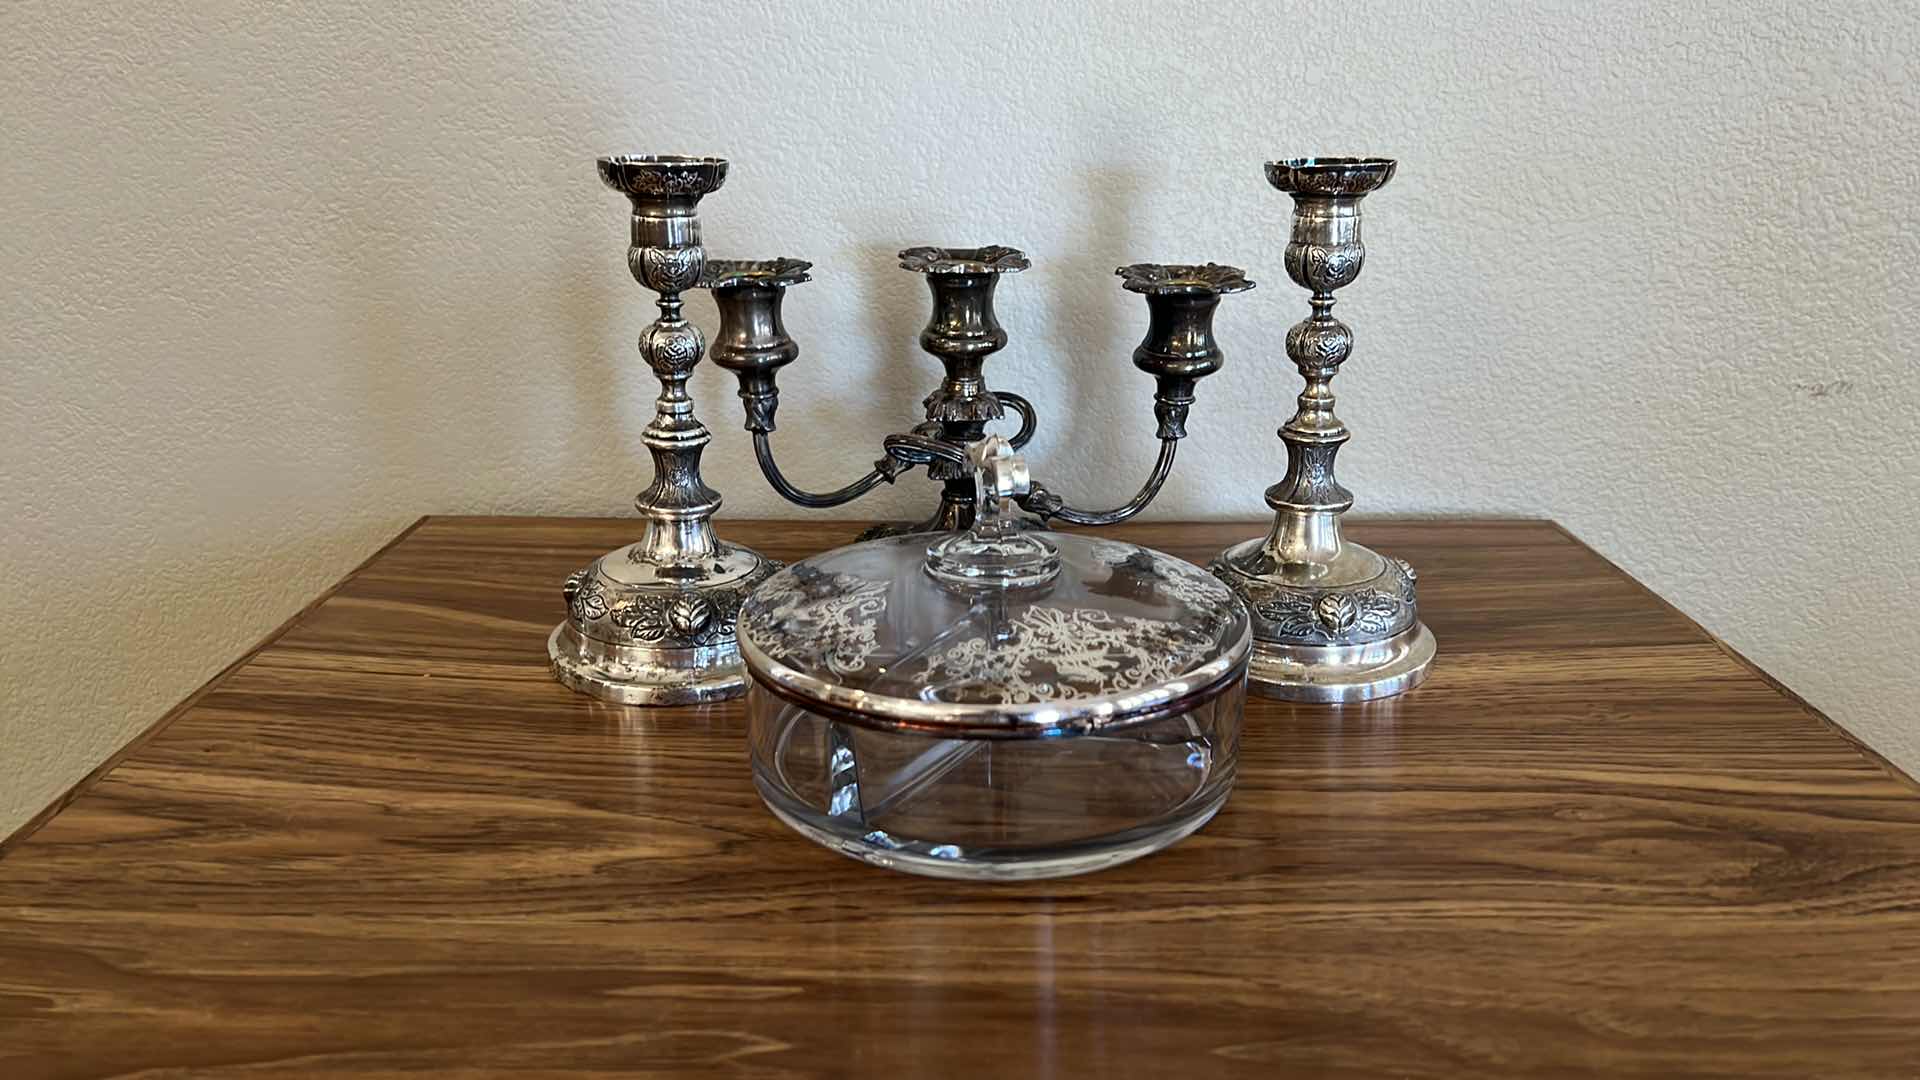 Photo 4 of SILVER-PLATED CANDLEHOLDERS, VINTAGE GLASS COVERED CANDY DISH